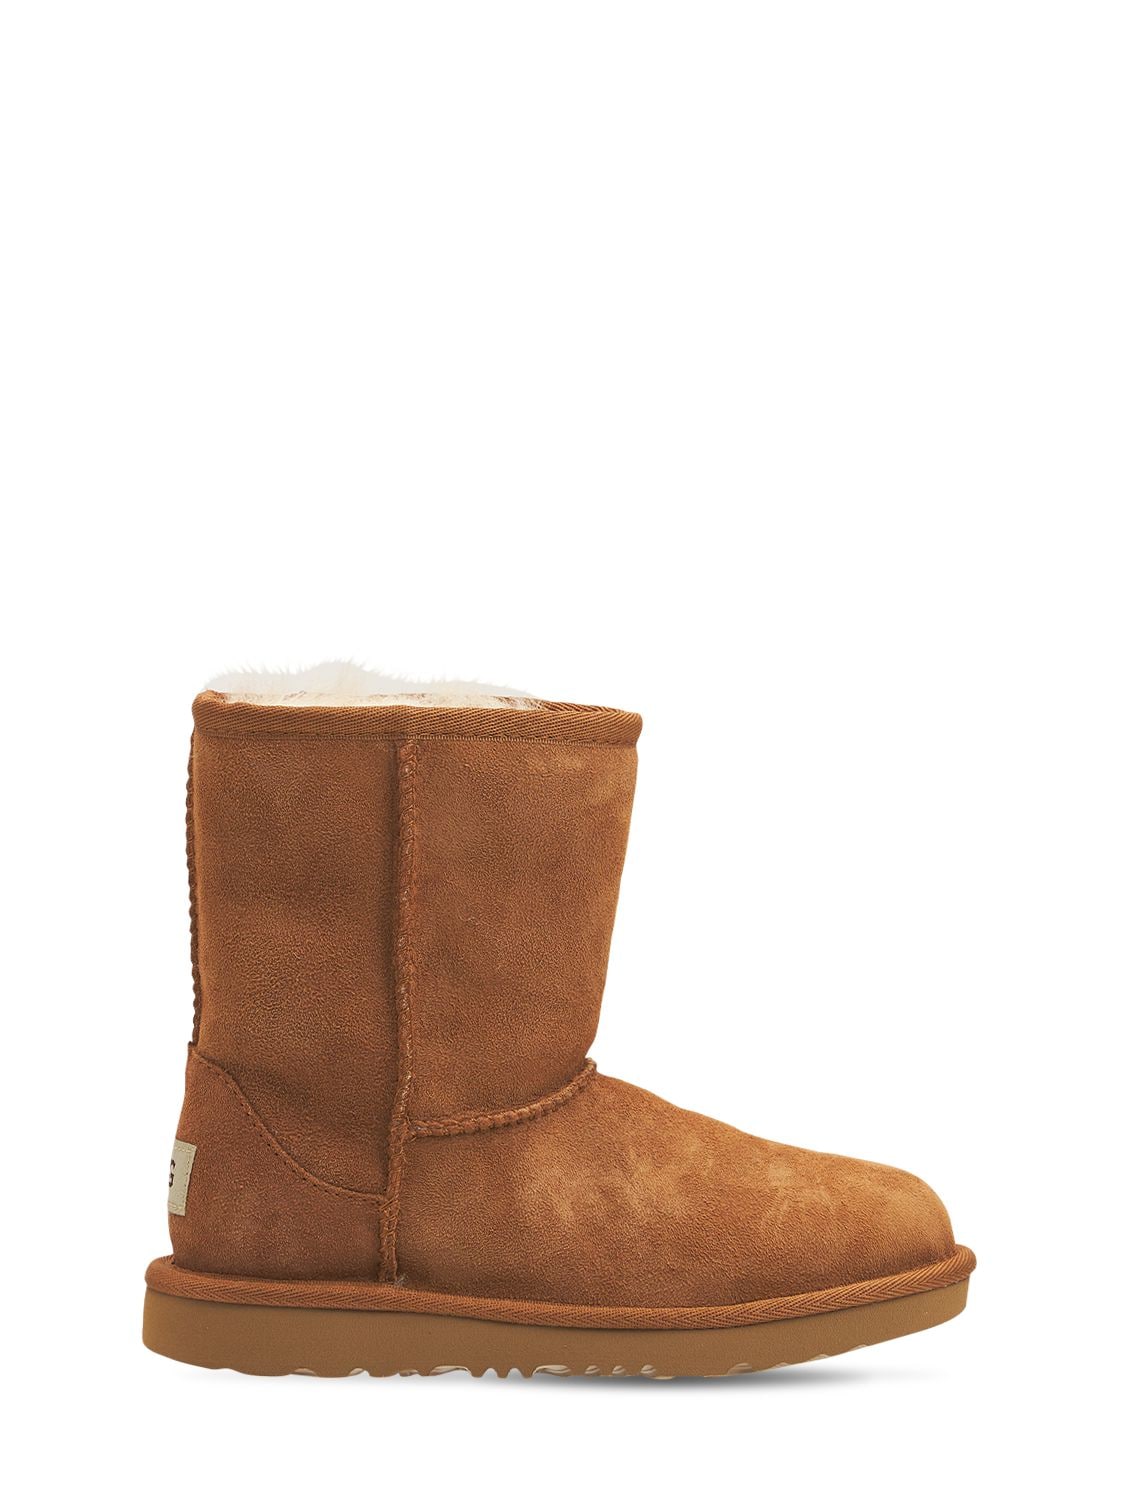 Classic Shearling Boots